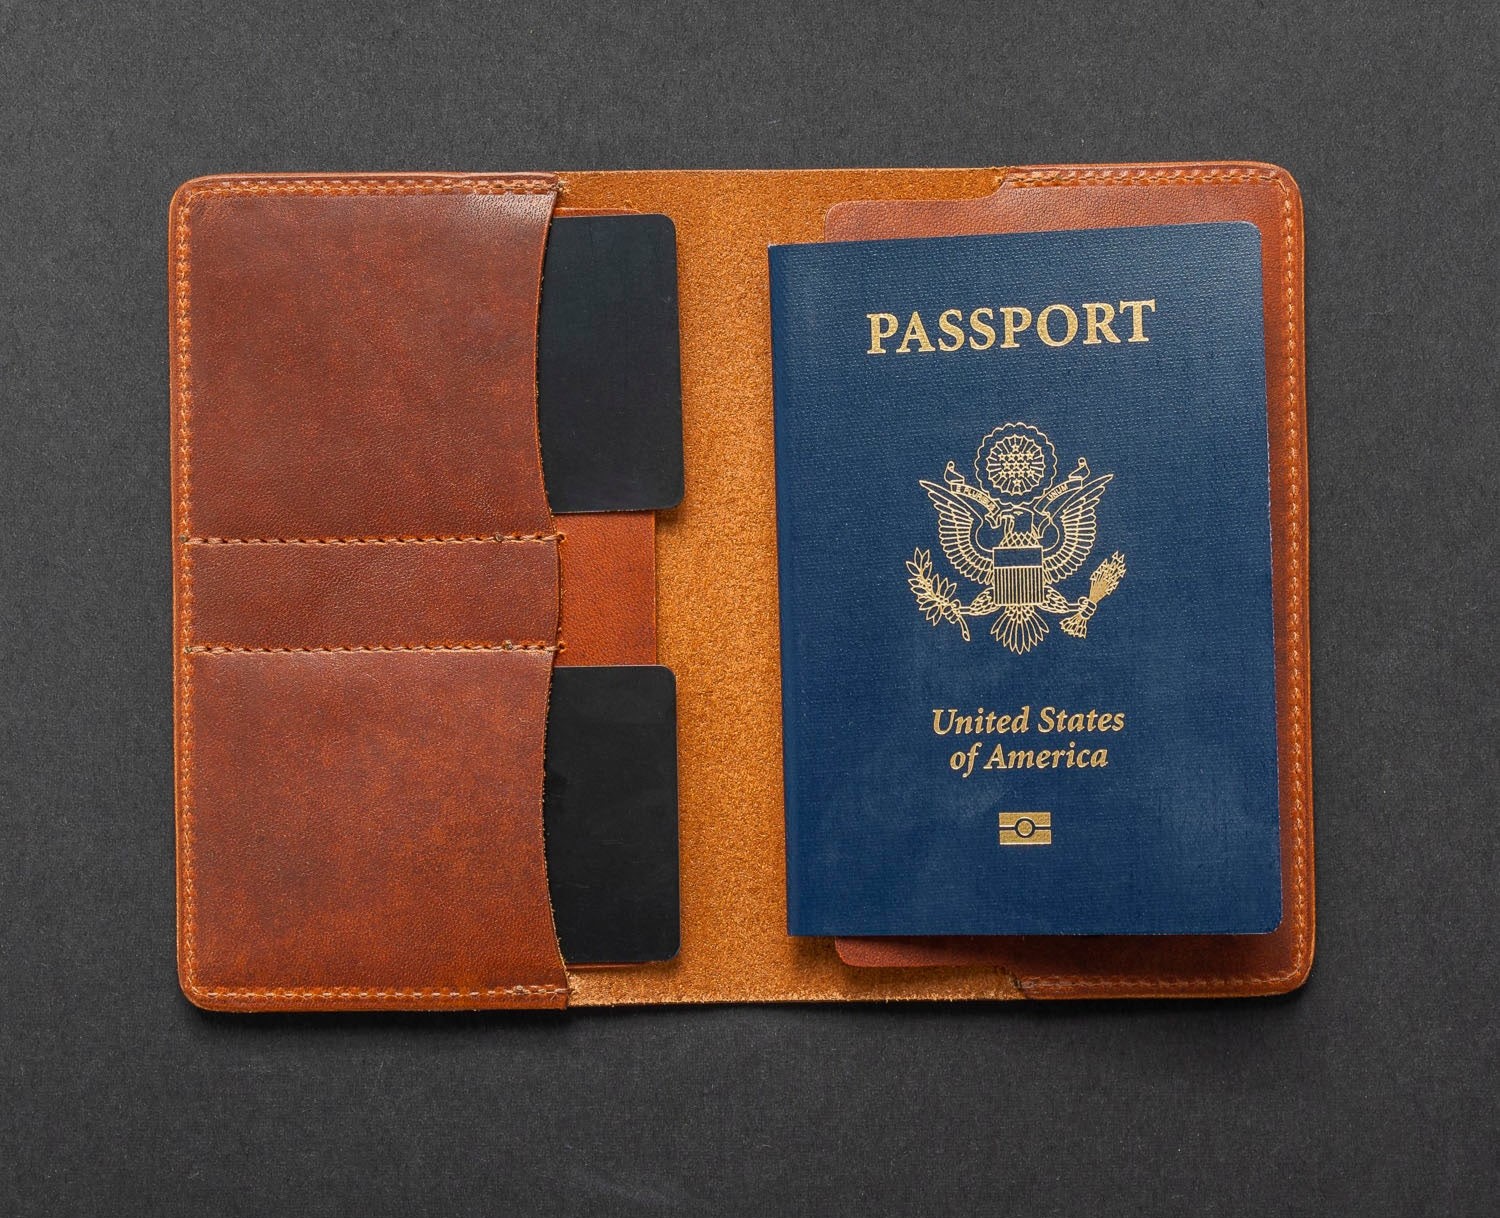 Passport Holder Review: Stylish and Functional